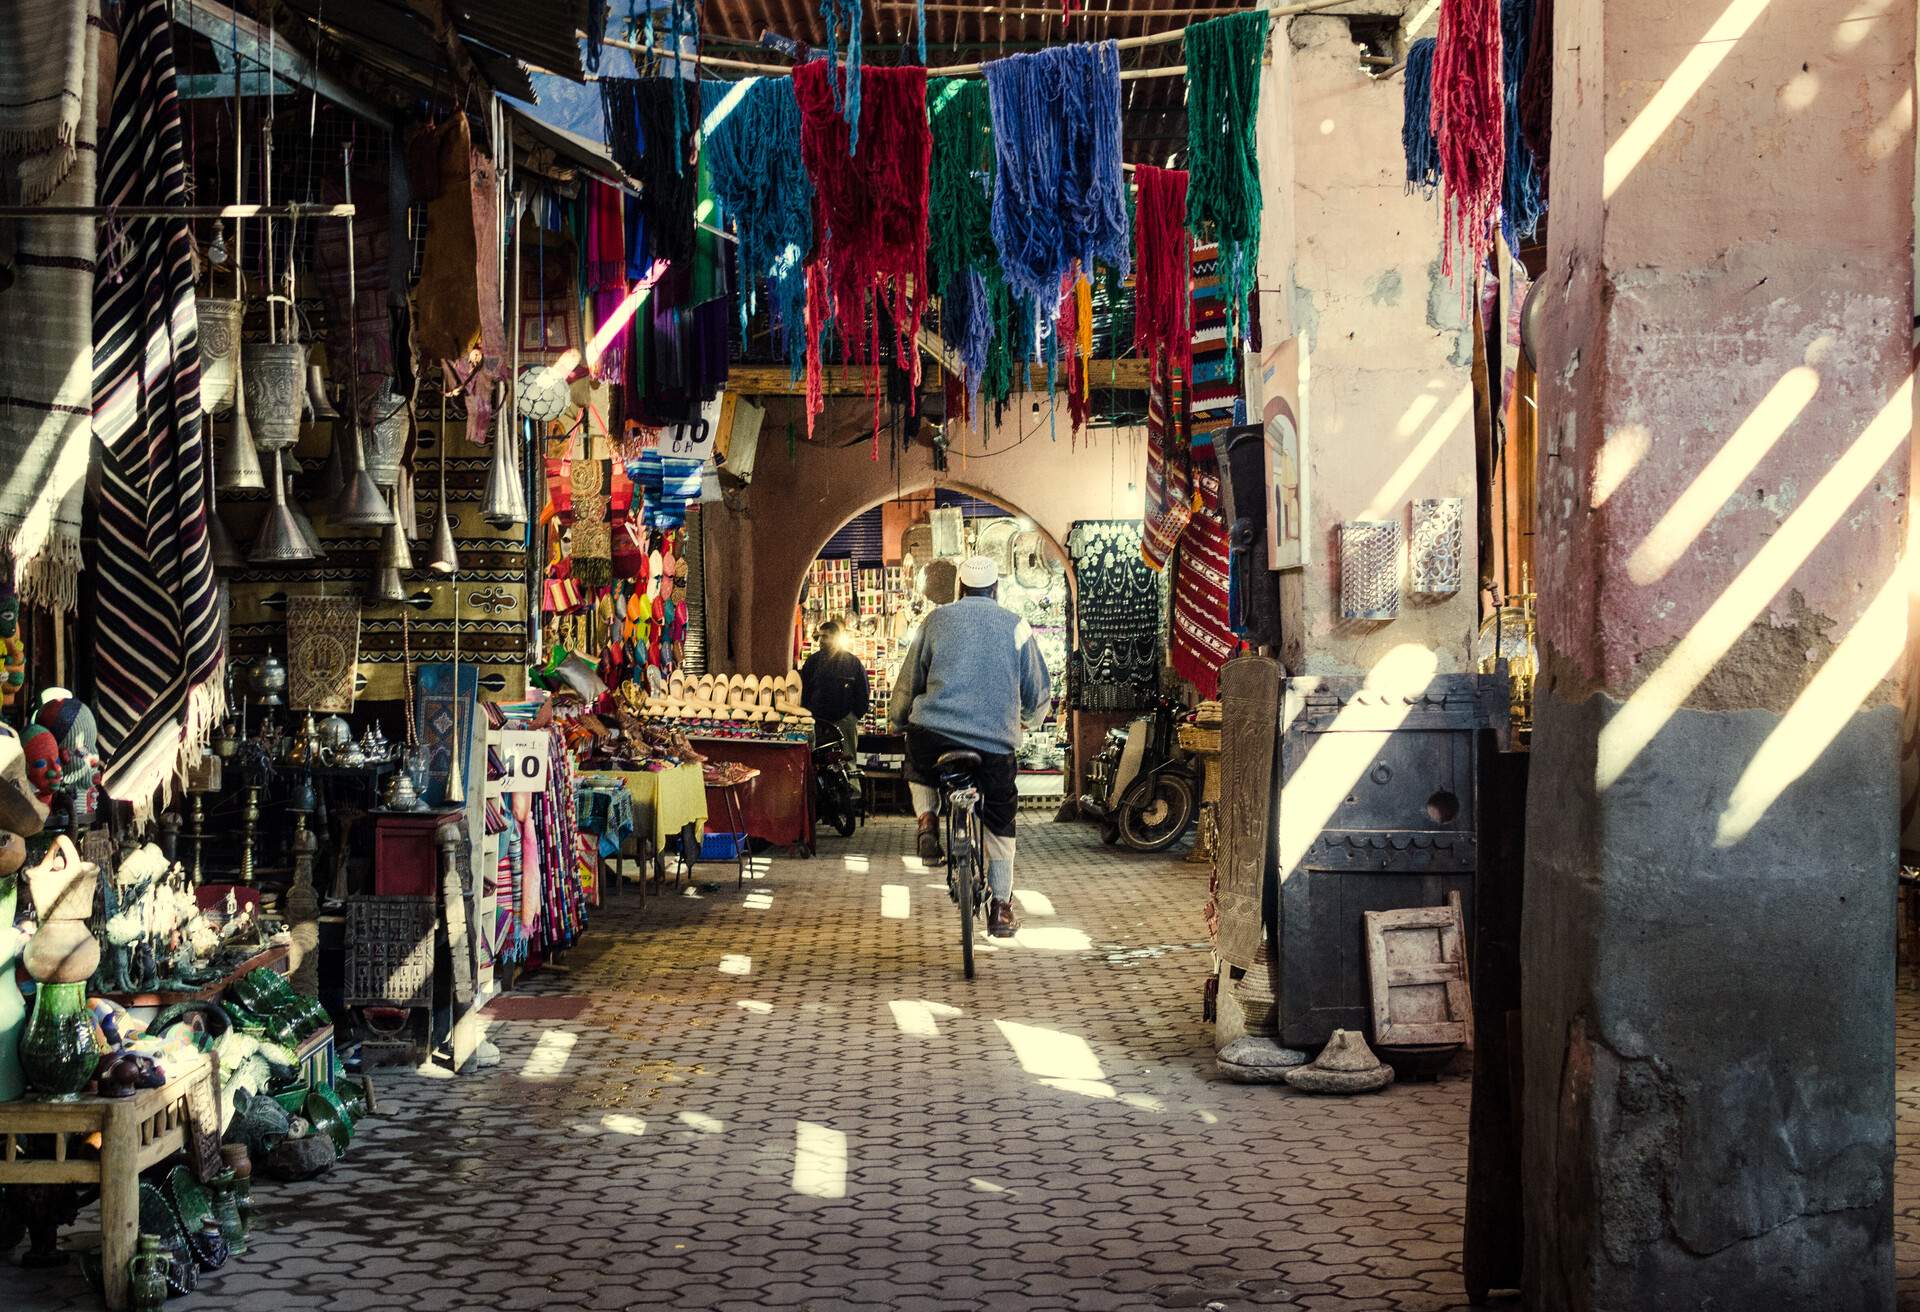 The souq is an open air marketplace in the medina (old city) of Marrakesh, where tradional handicrafts are sold.